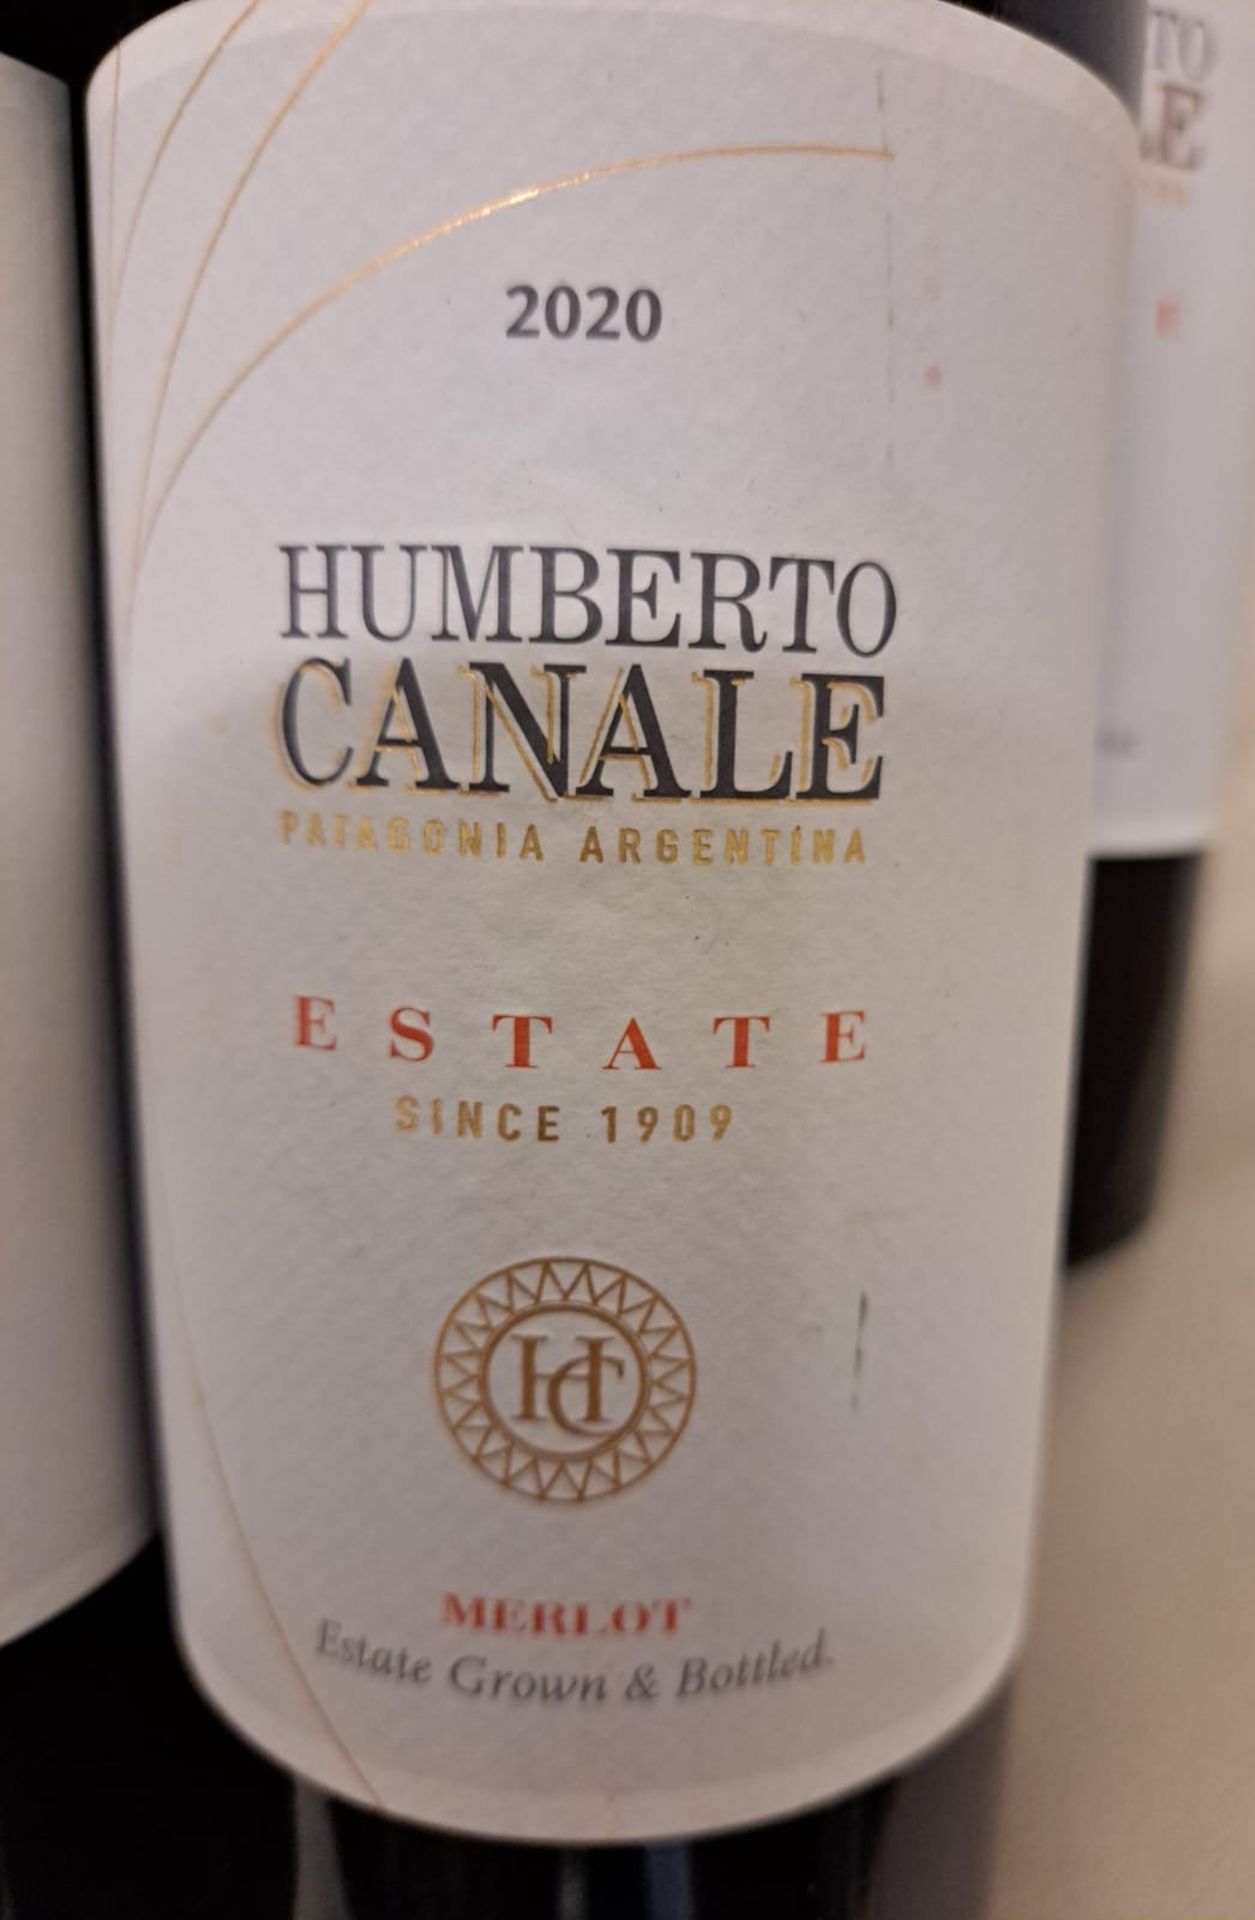 5 x Bottles of 2020 Humberto Canale Estate Merlot Red Wine - Retail Price £80 - Ref: WAS039 - CL8 - Image 2 of 2